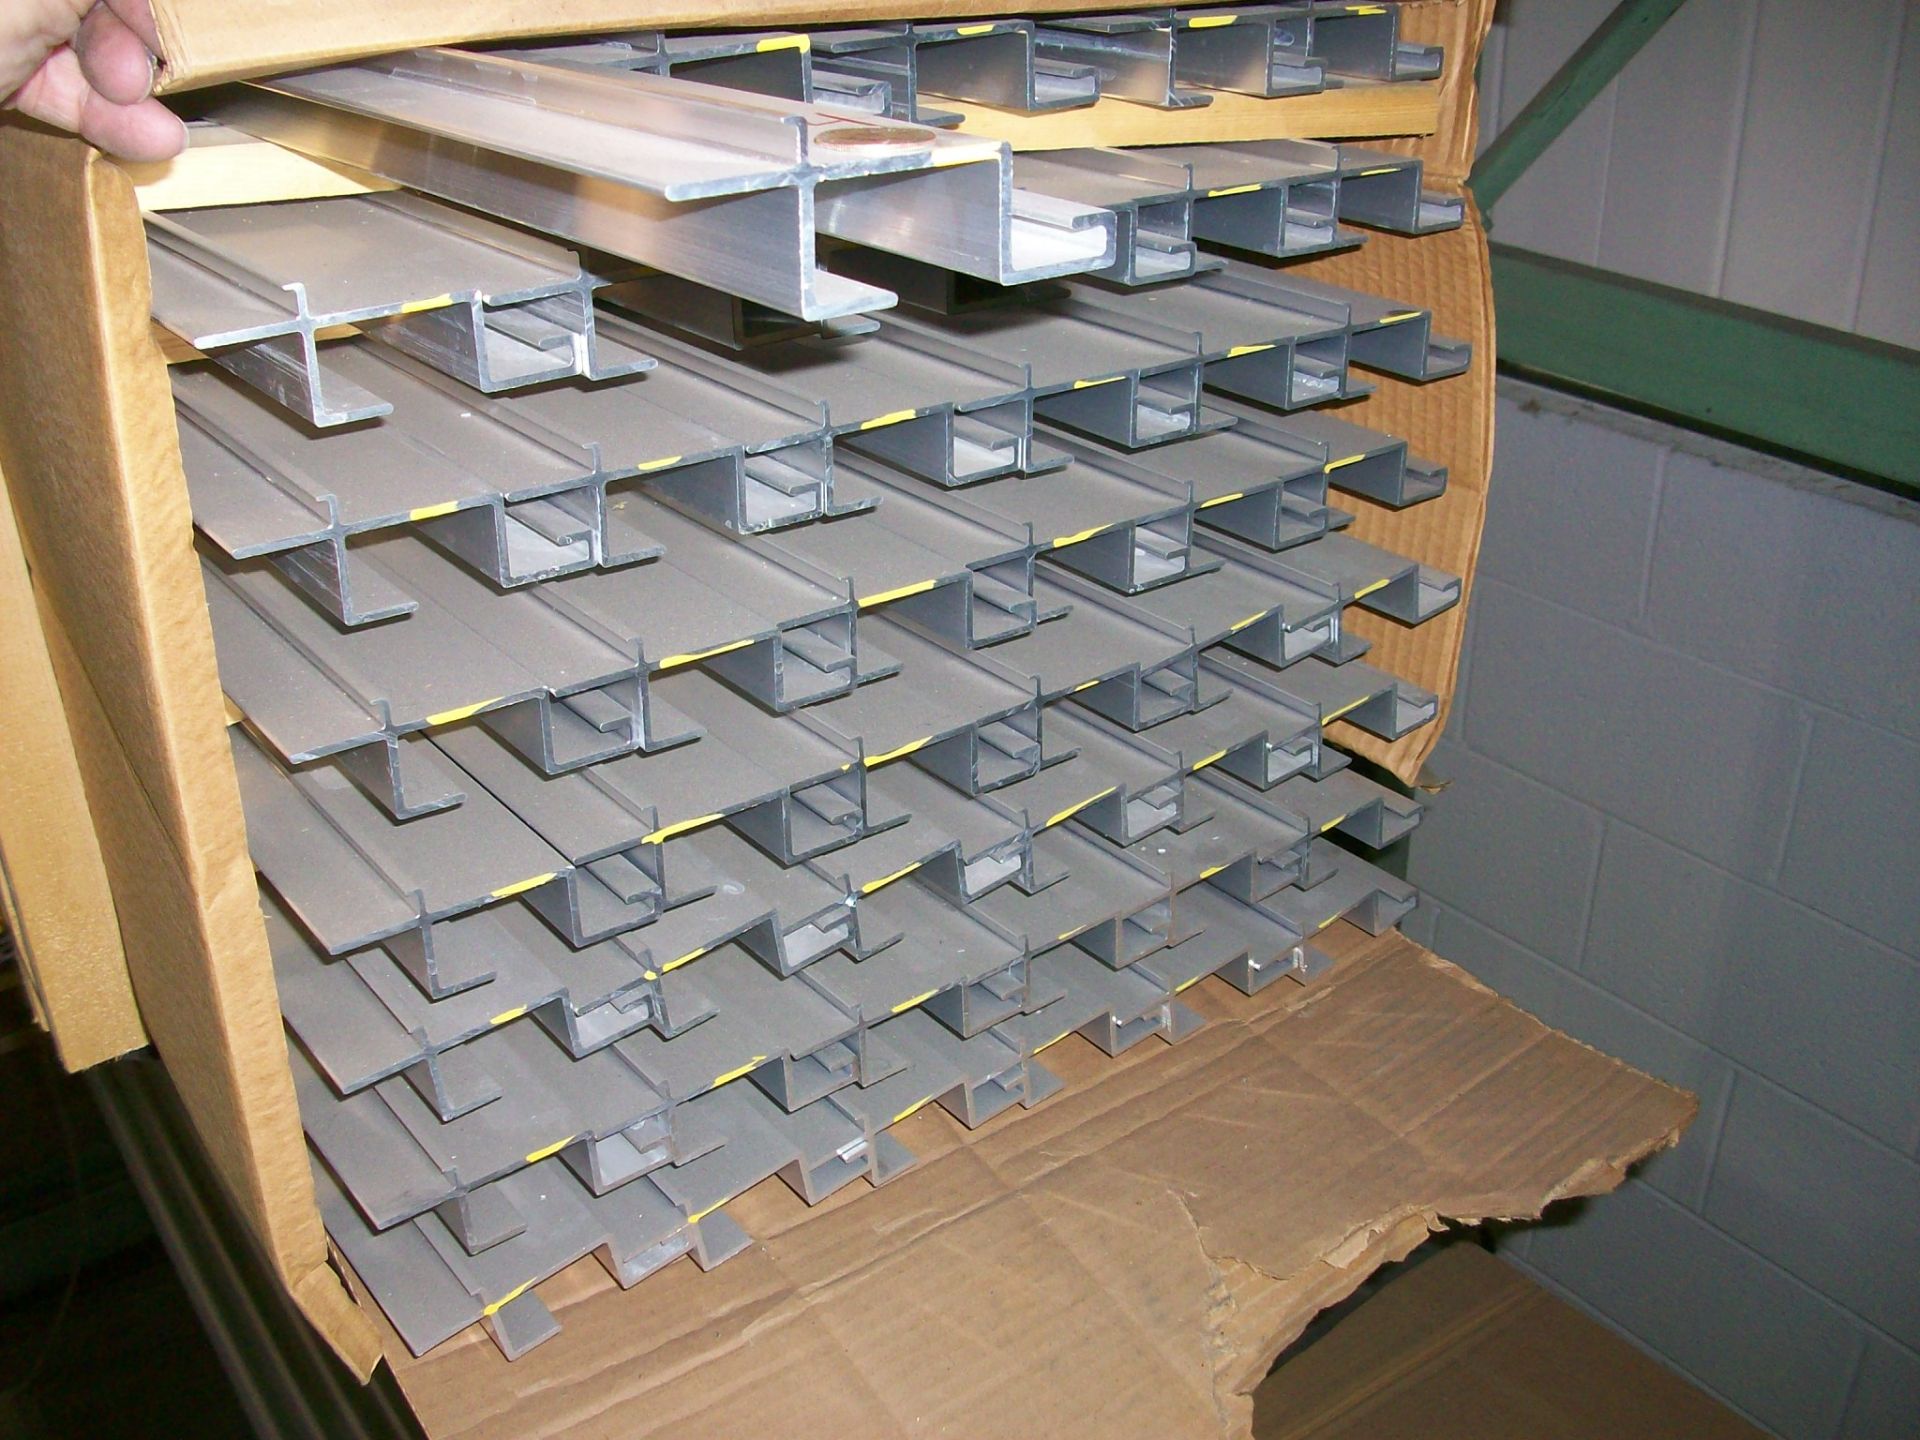 Lot-Aluminum Extrusion and Corrugated Galvanized Materials on (1) Rack, (Rack Not Included) - Image 14 of 17